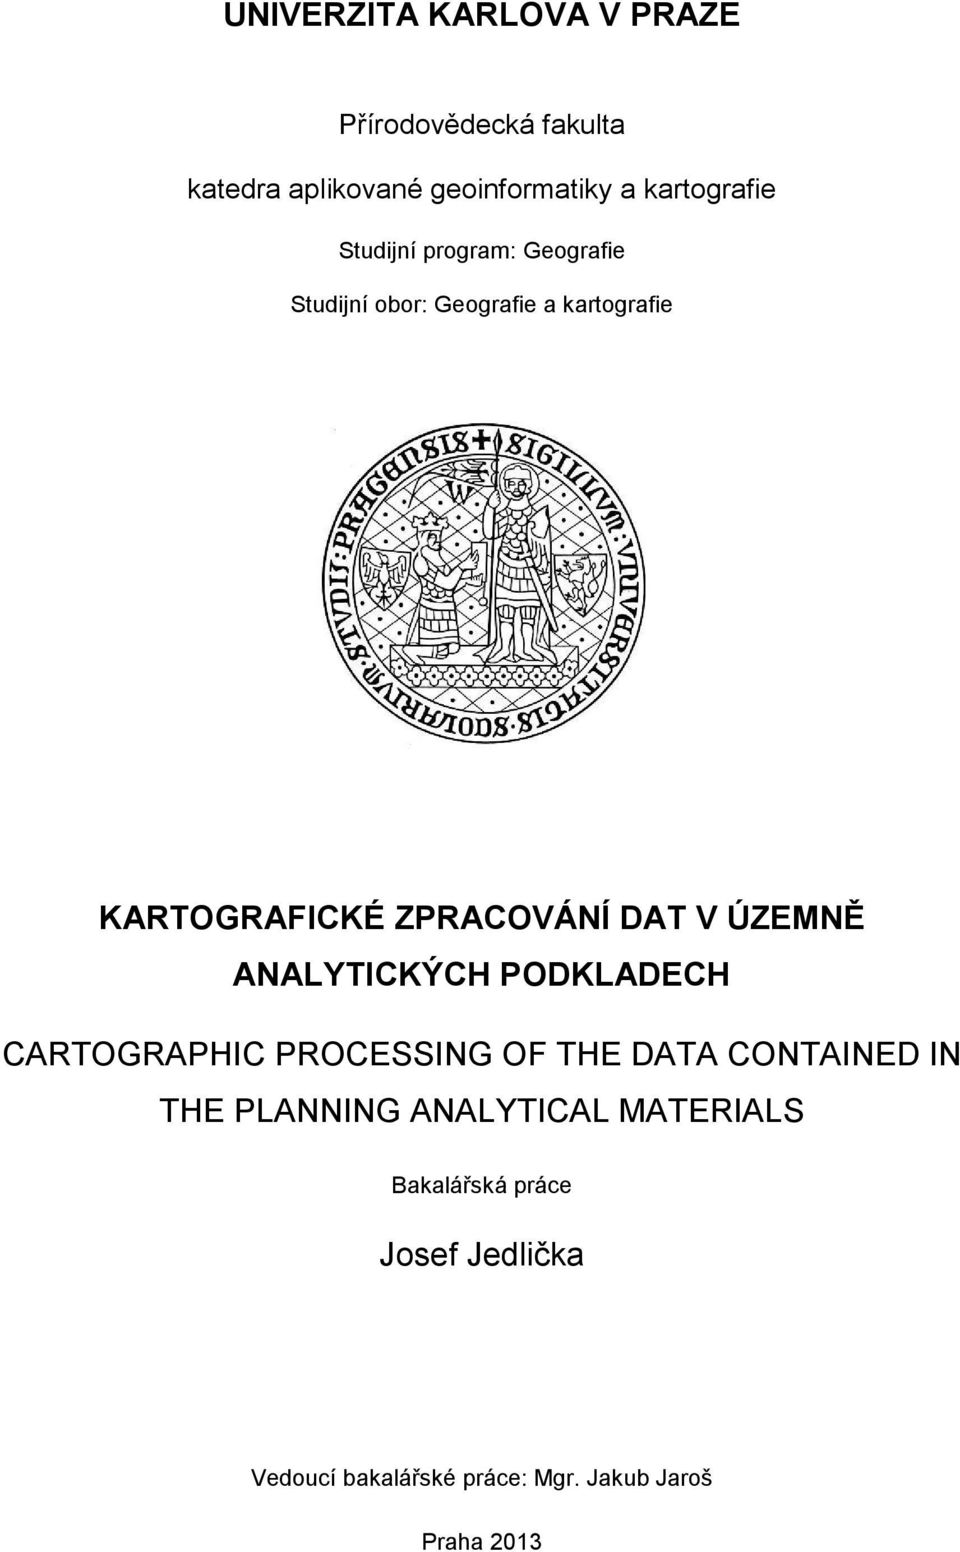 ÚZEMNĚ ANALYTICKÝCH PODKLADECH CARTOGRAPHIC PROCESSING OF THE DATA CONTAINED IN THE PLANNING